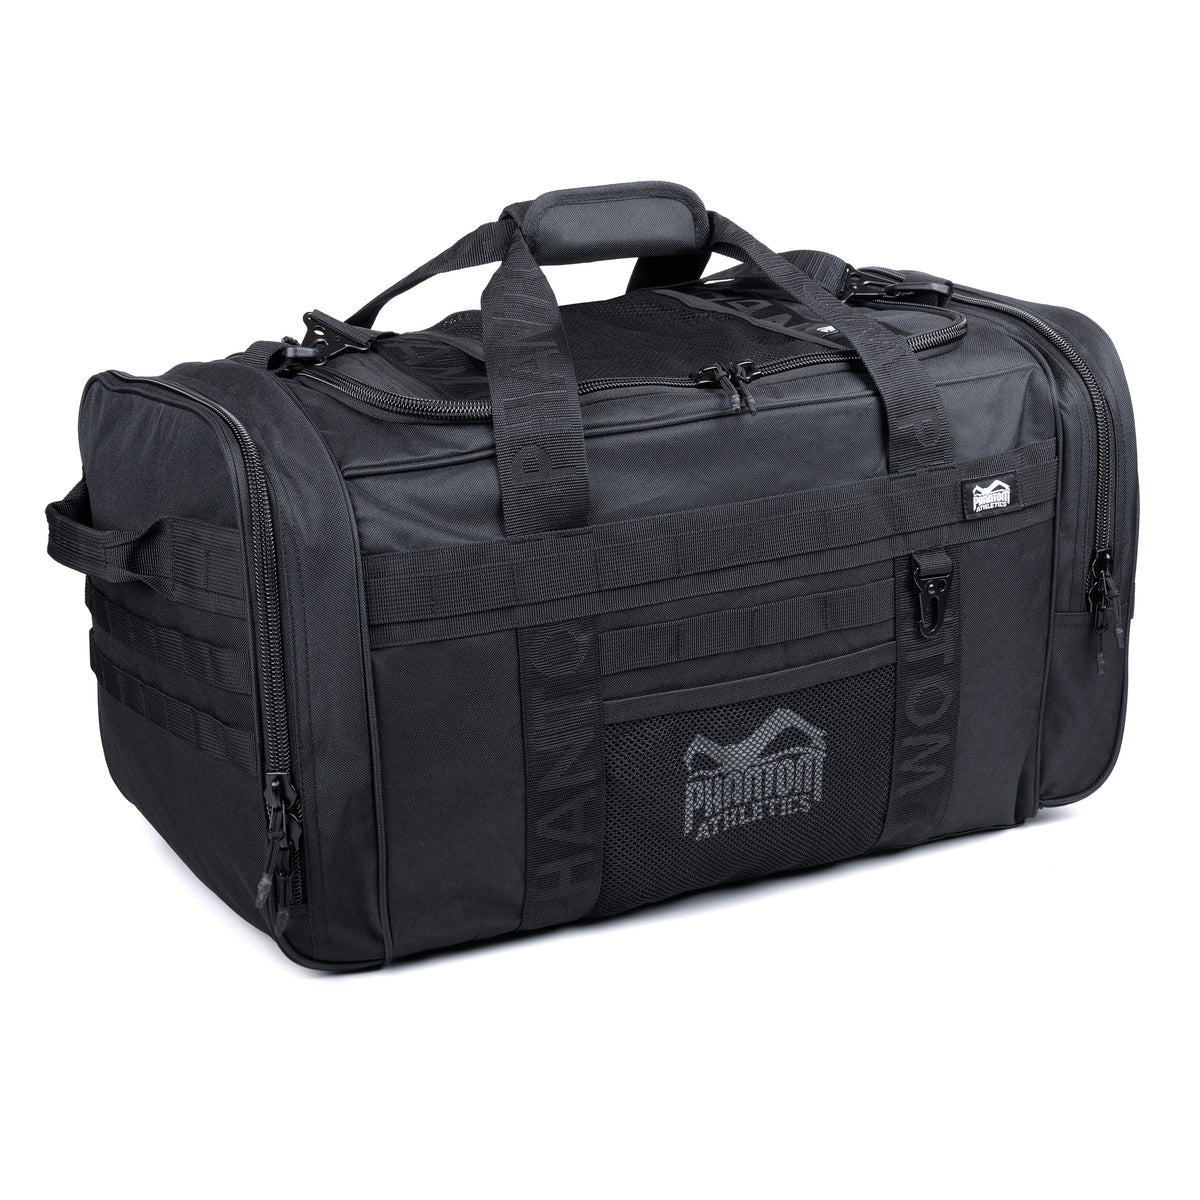 Phantom Tactic training bag for martial arts front view